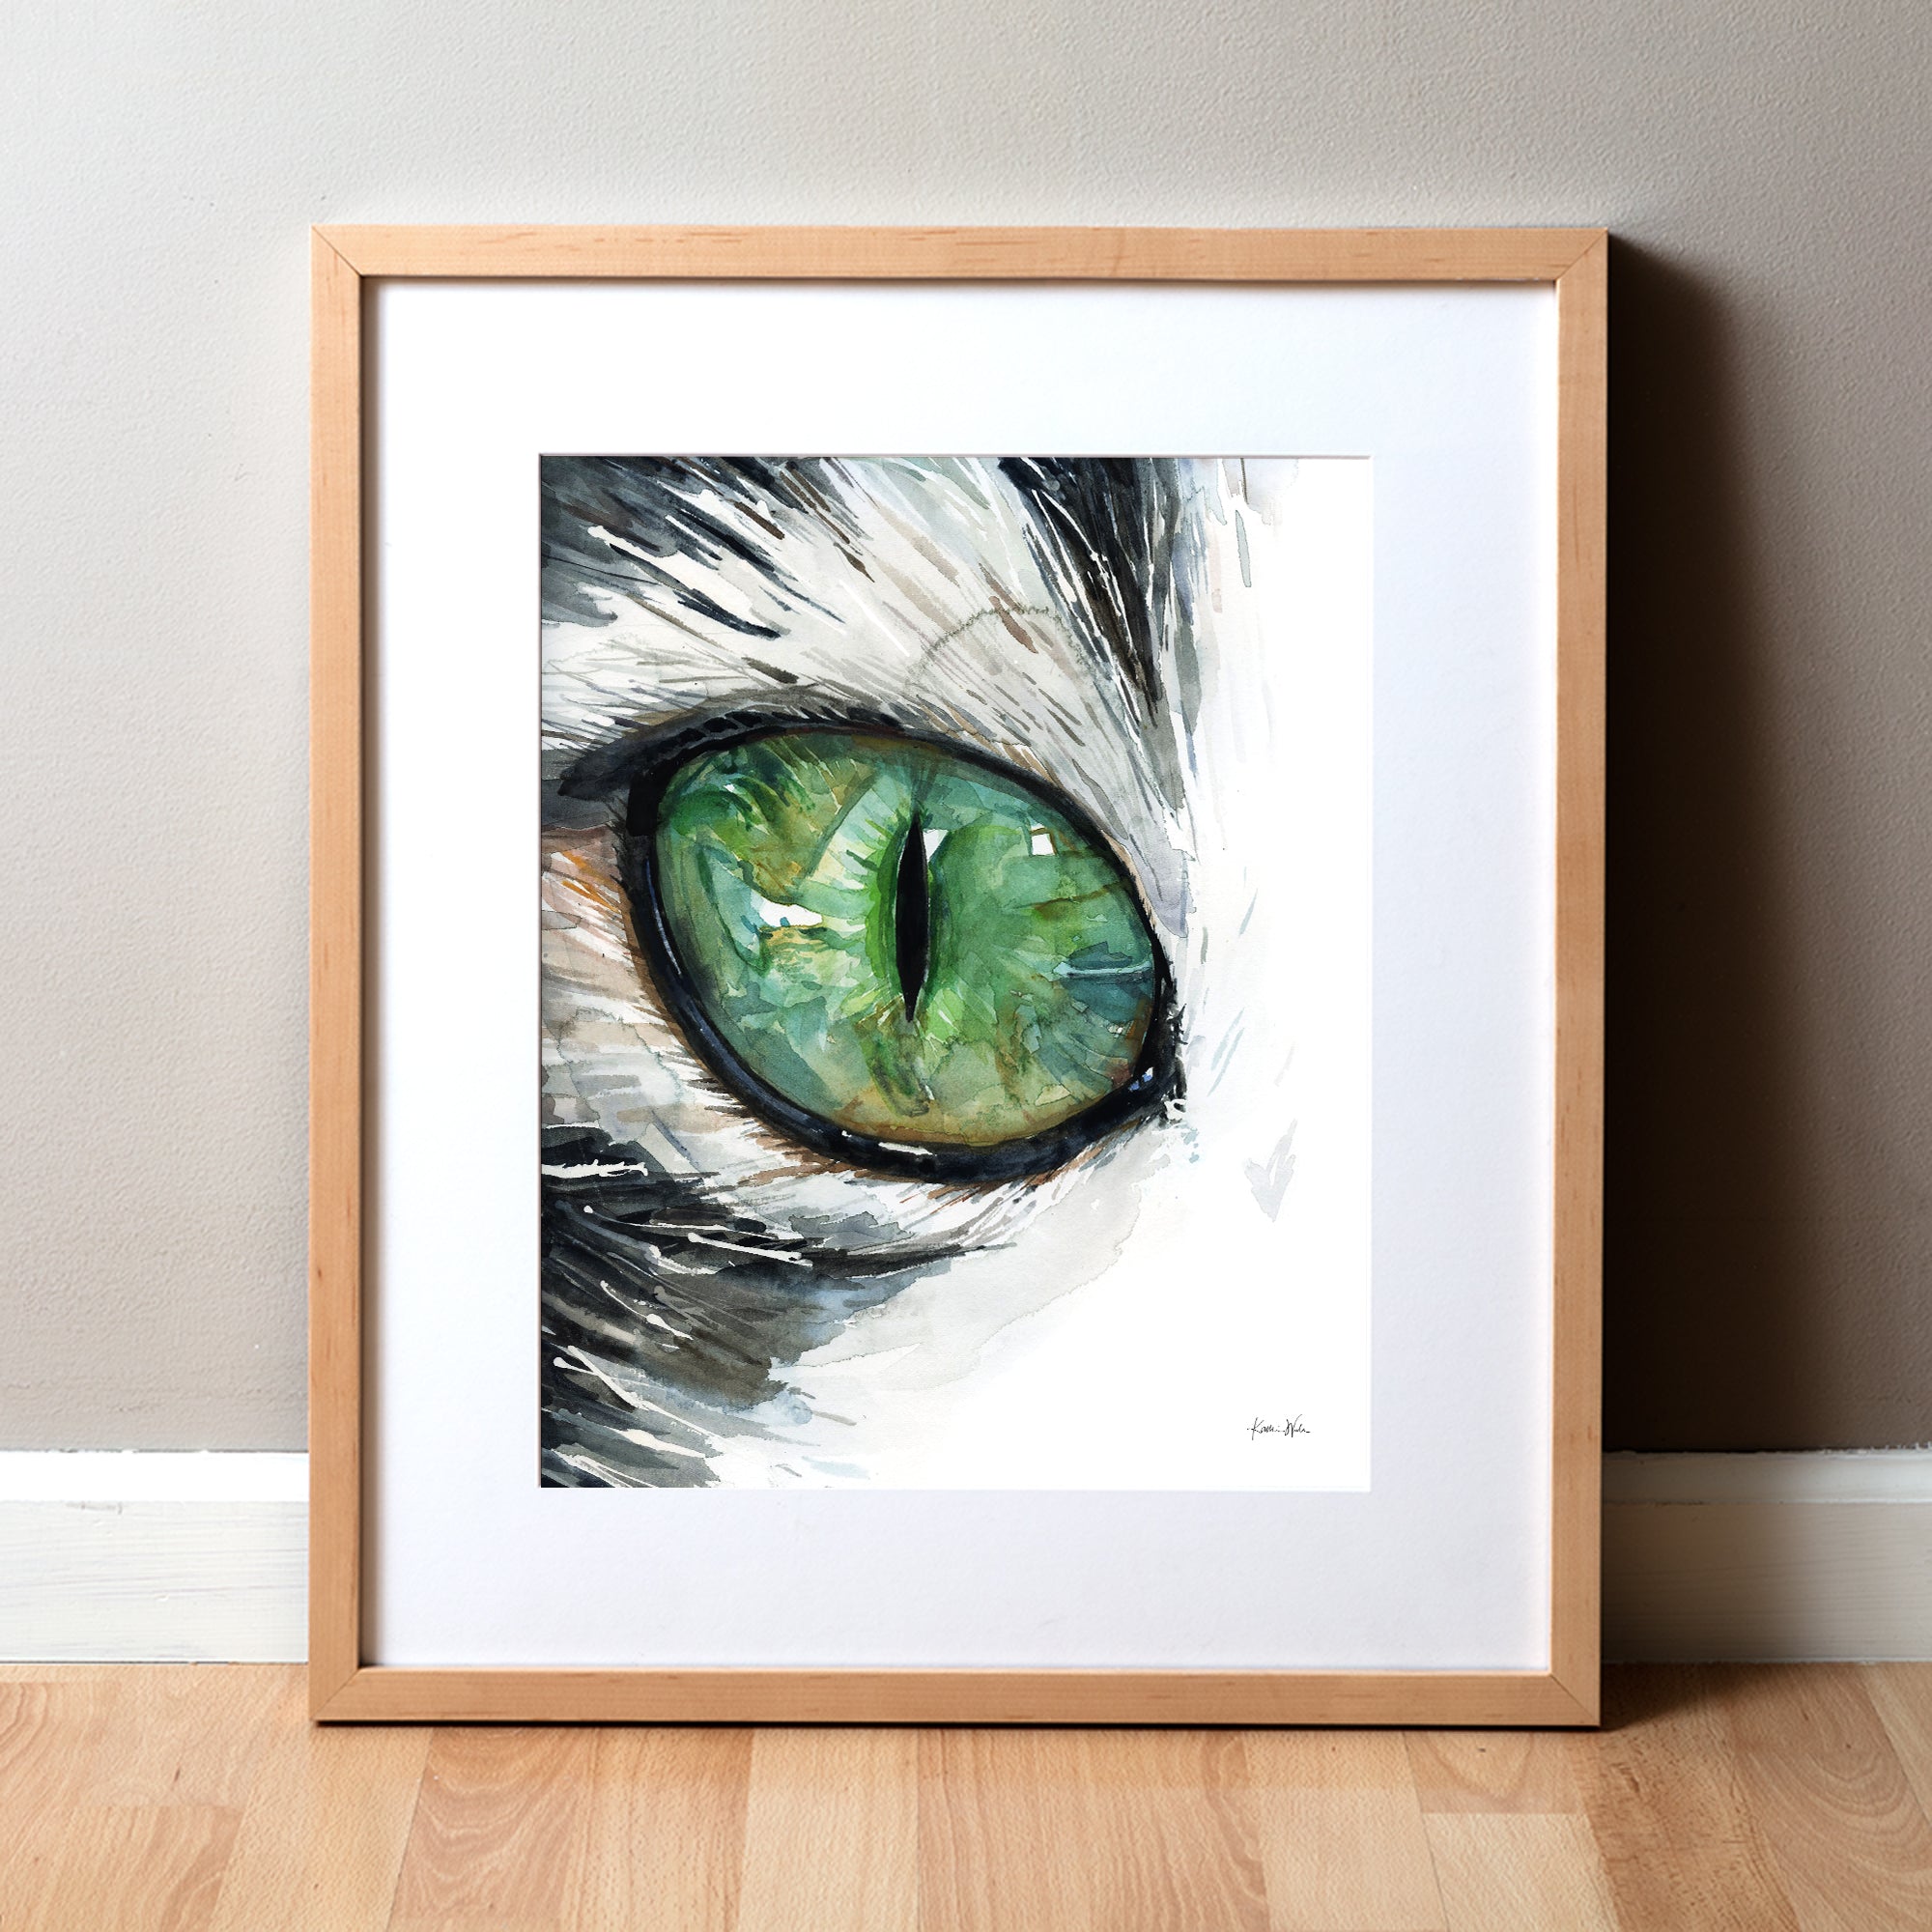 Framed watercolor painting of a zoomed in perspective of a green cat's eye. The hair surrounding the eye is black and white.